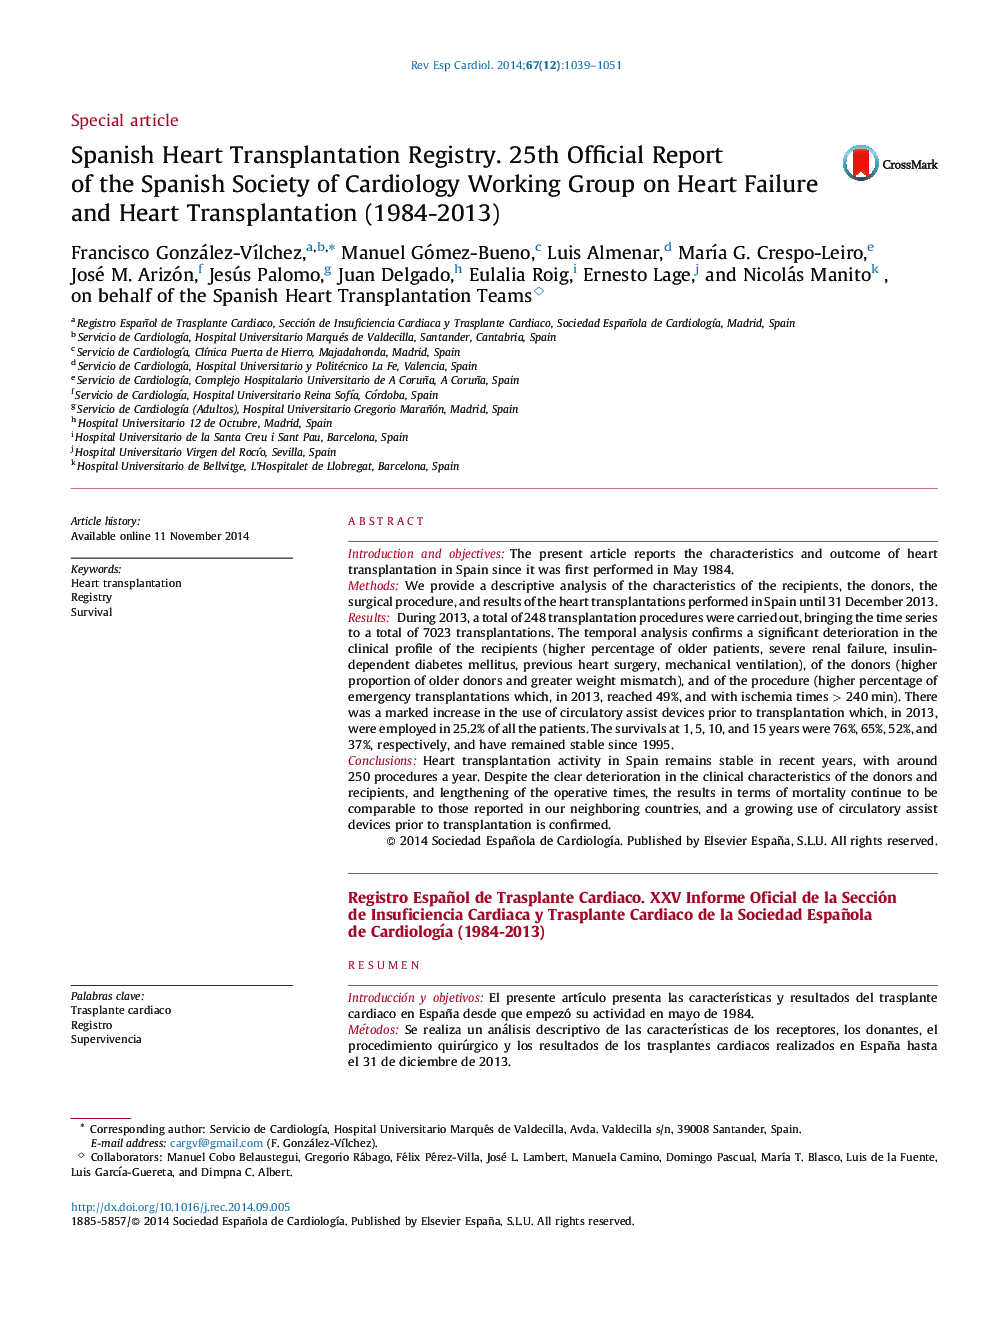 Spanish Heart Transplantation Registry. 25th Official Report of the Spanish Society of Cardiology Working Group on Heart Failure and Heart Transplantation (1984-2013)